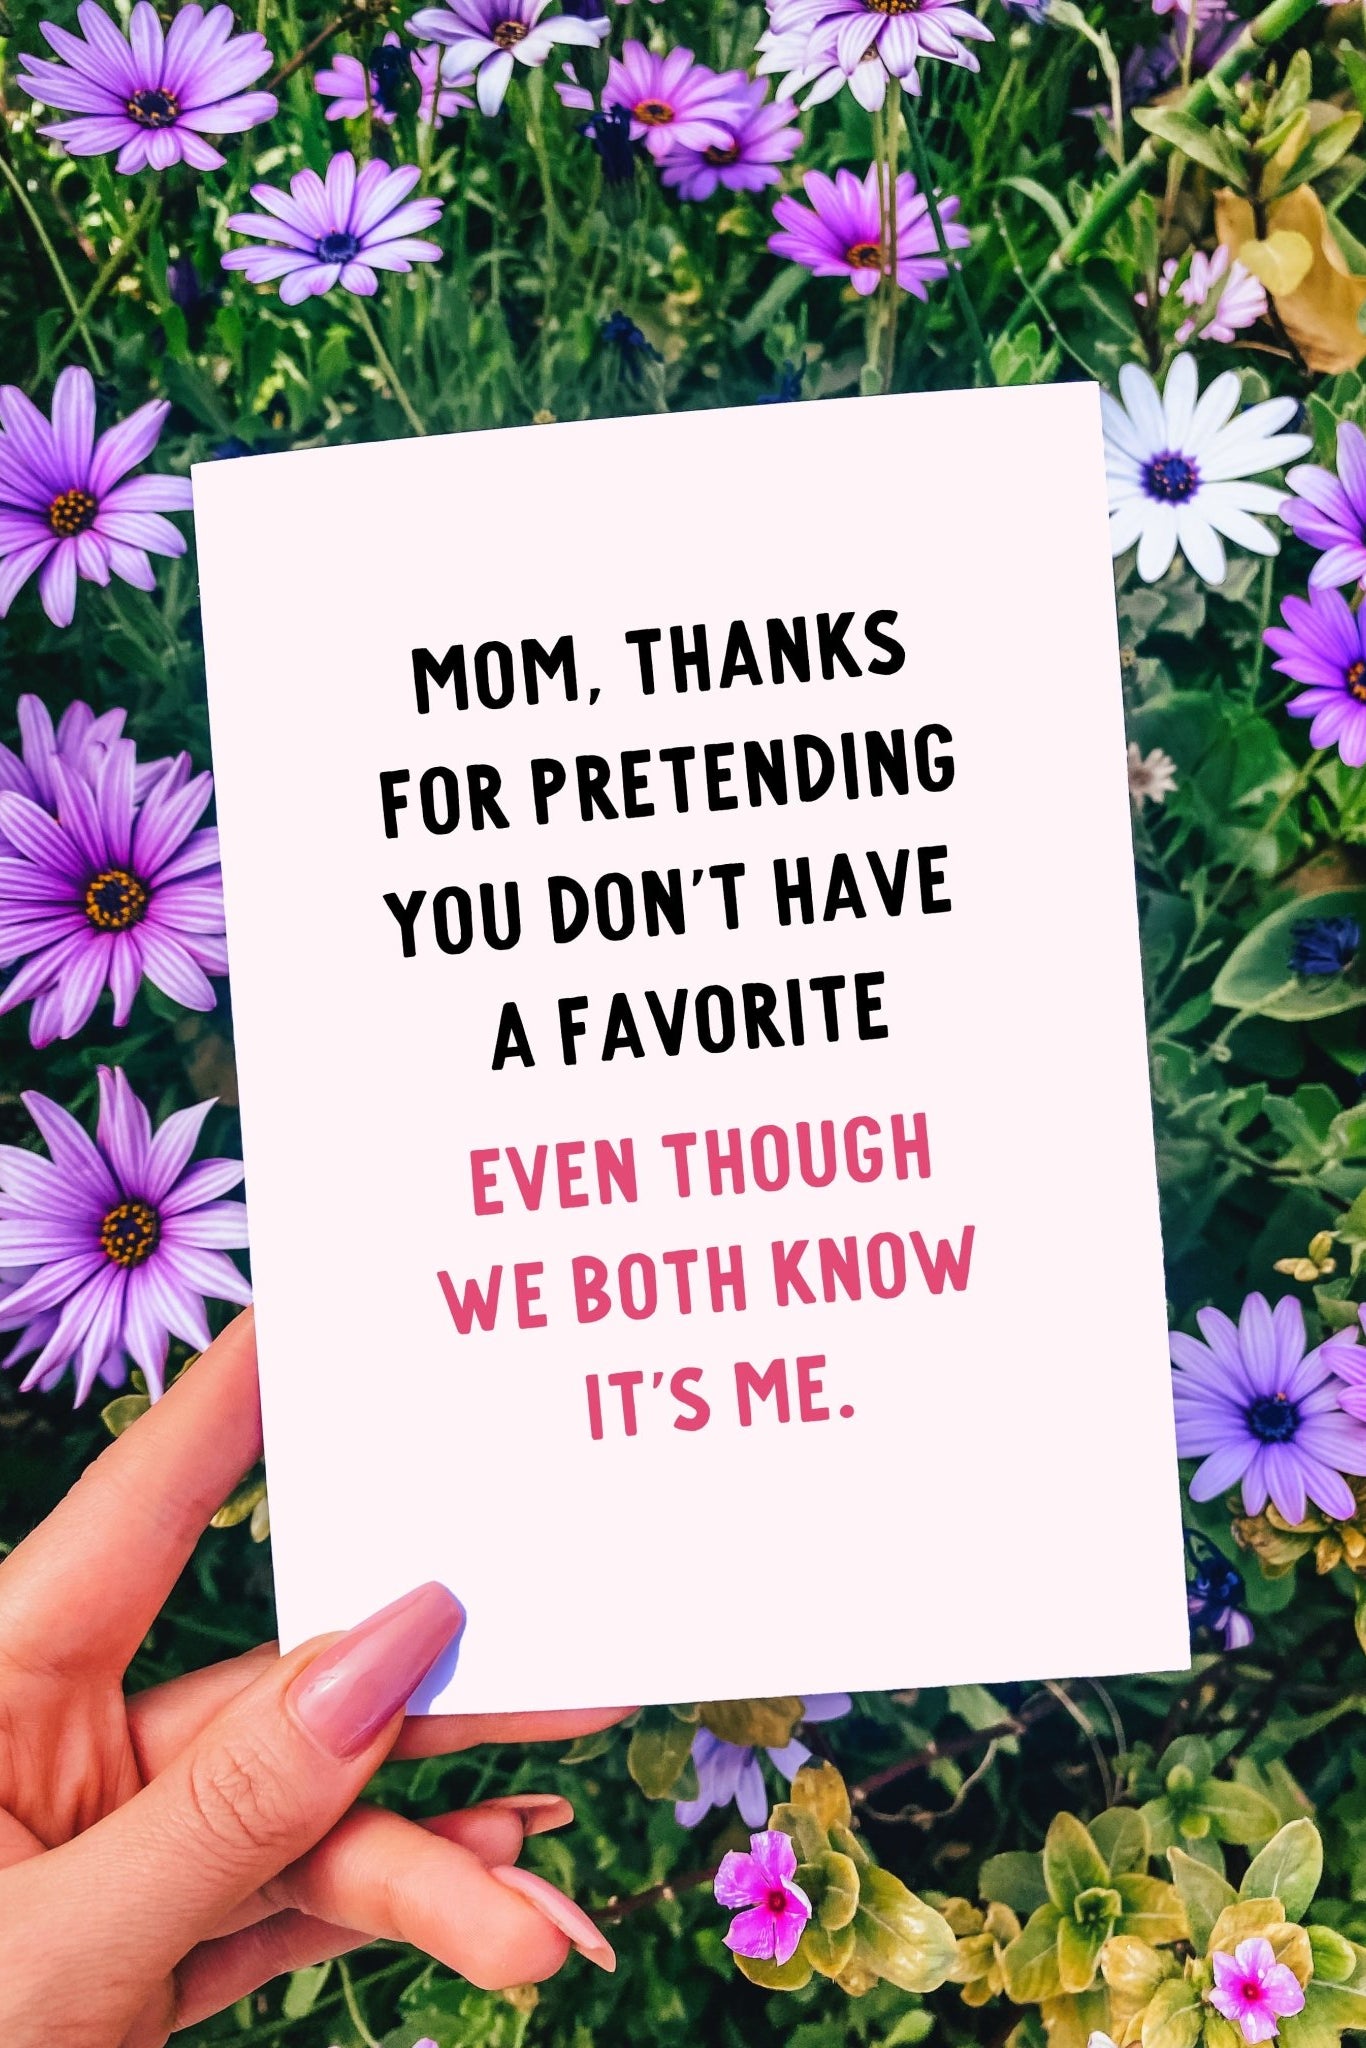 Mom Thanks For Pretending You Don't Have A Favorite Even though We Both Know It's Me Greeting Card - UntamedEgo LLC.